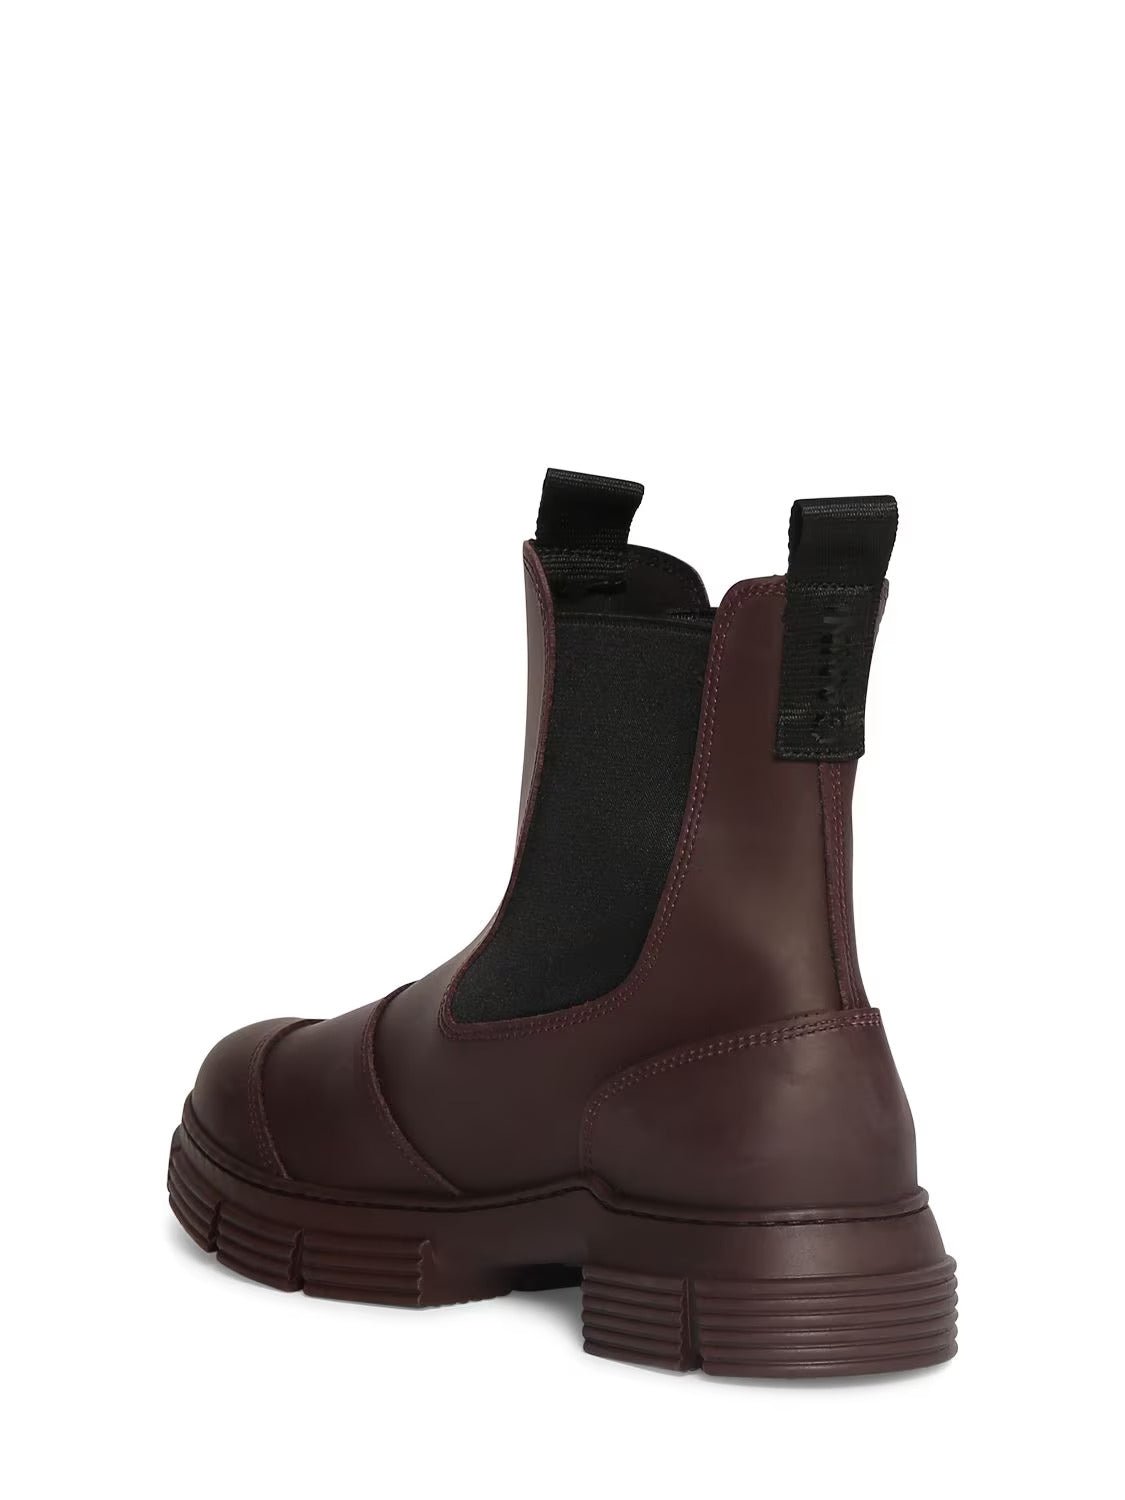 Recycled Rubber City Boot - Ganni - Danali - S2073-436-37